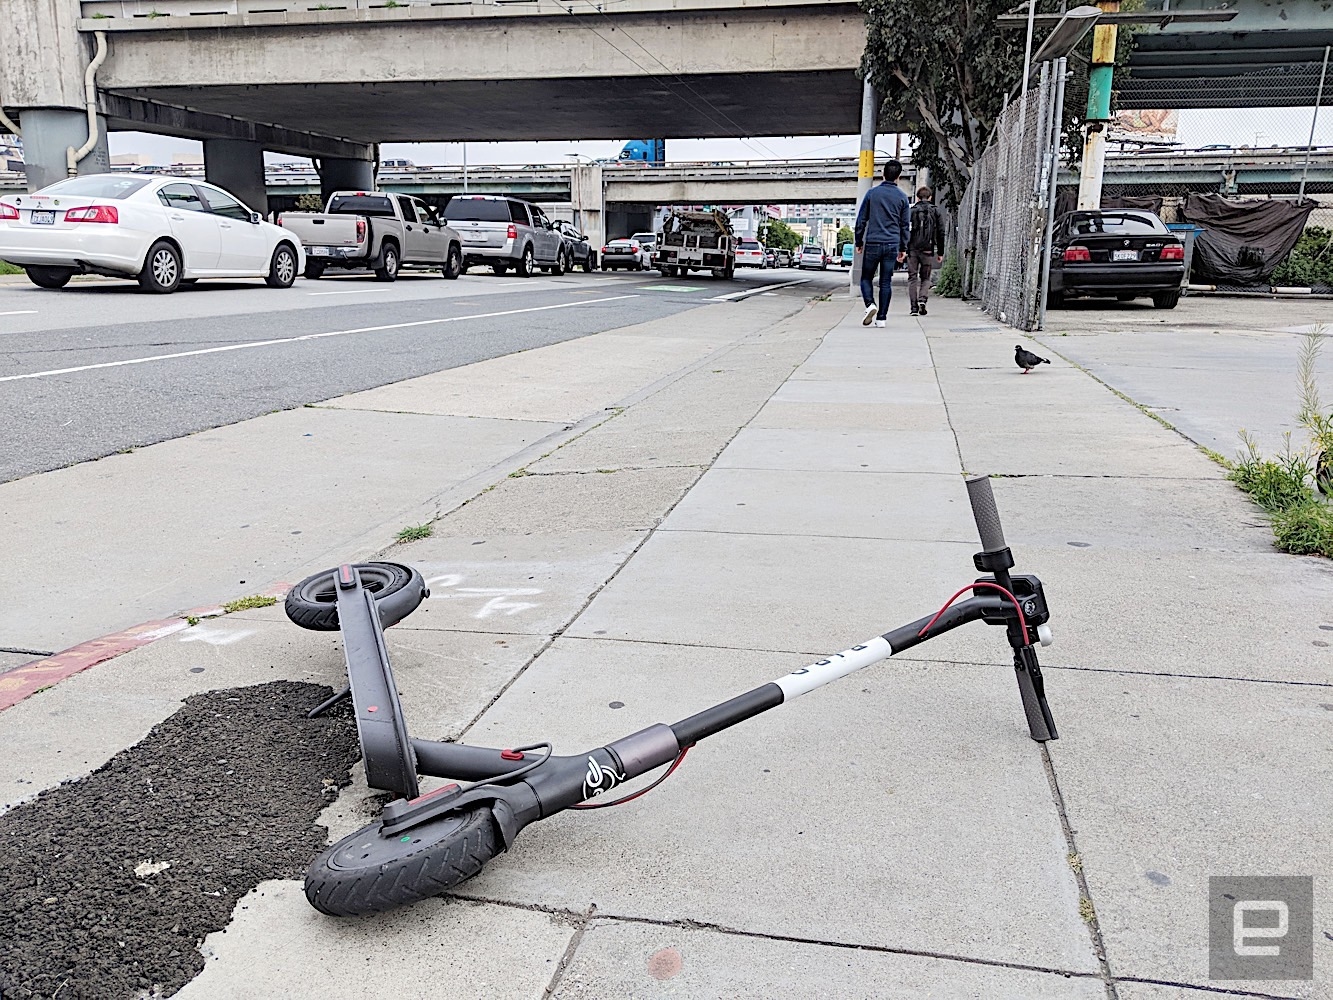 Silicon Valley’s scooter scourge is coming to an end | DeviceDaily.com